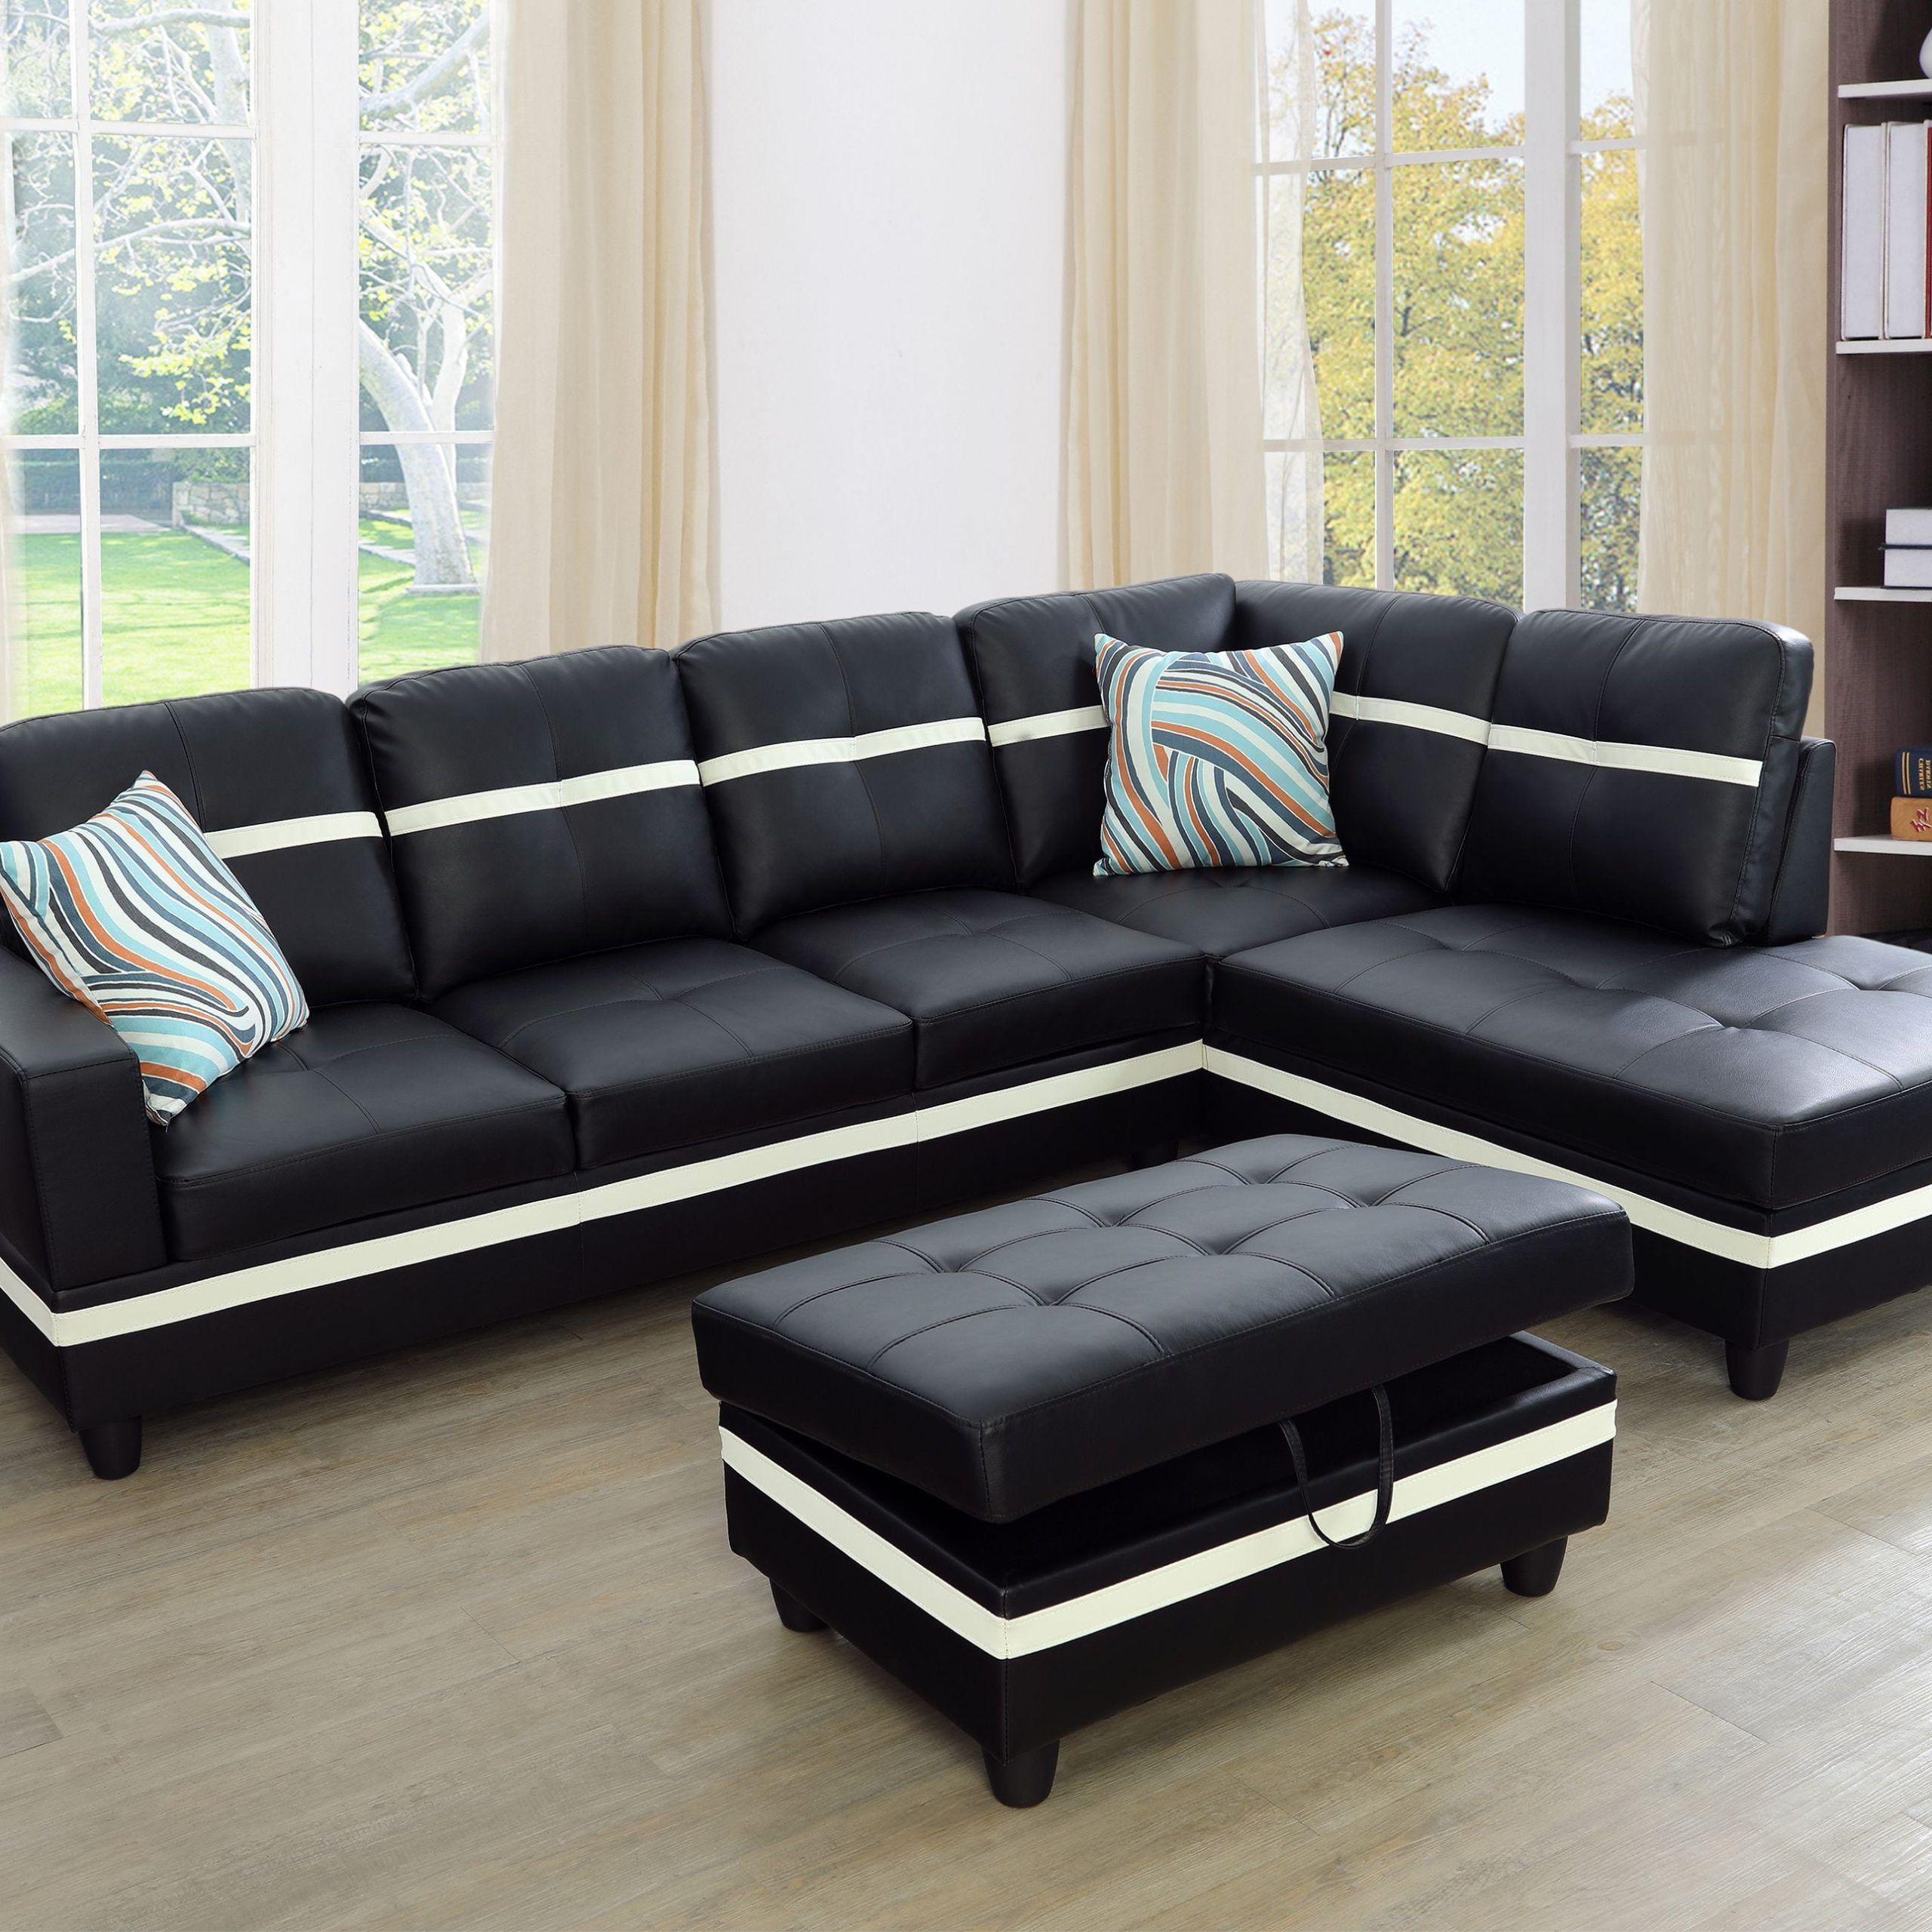 Aycp Furniture New Style  L Shape Sectional Sofa Set With Storage Intended For Faux Leather Sectional Sofa Sets (View 4 of 21)